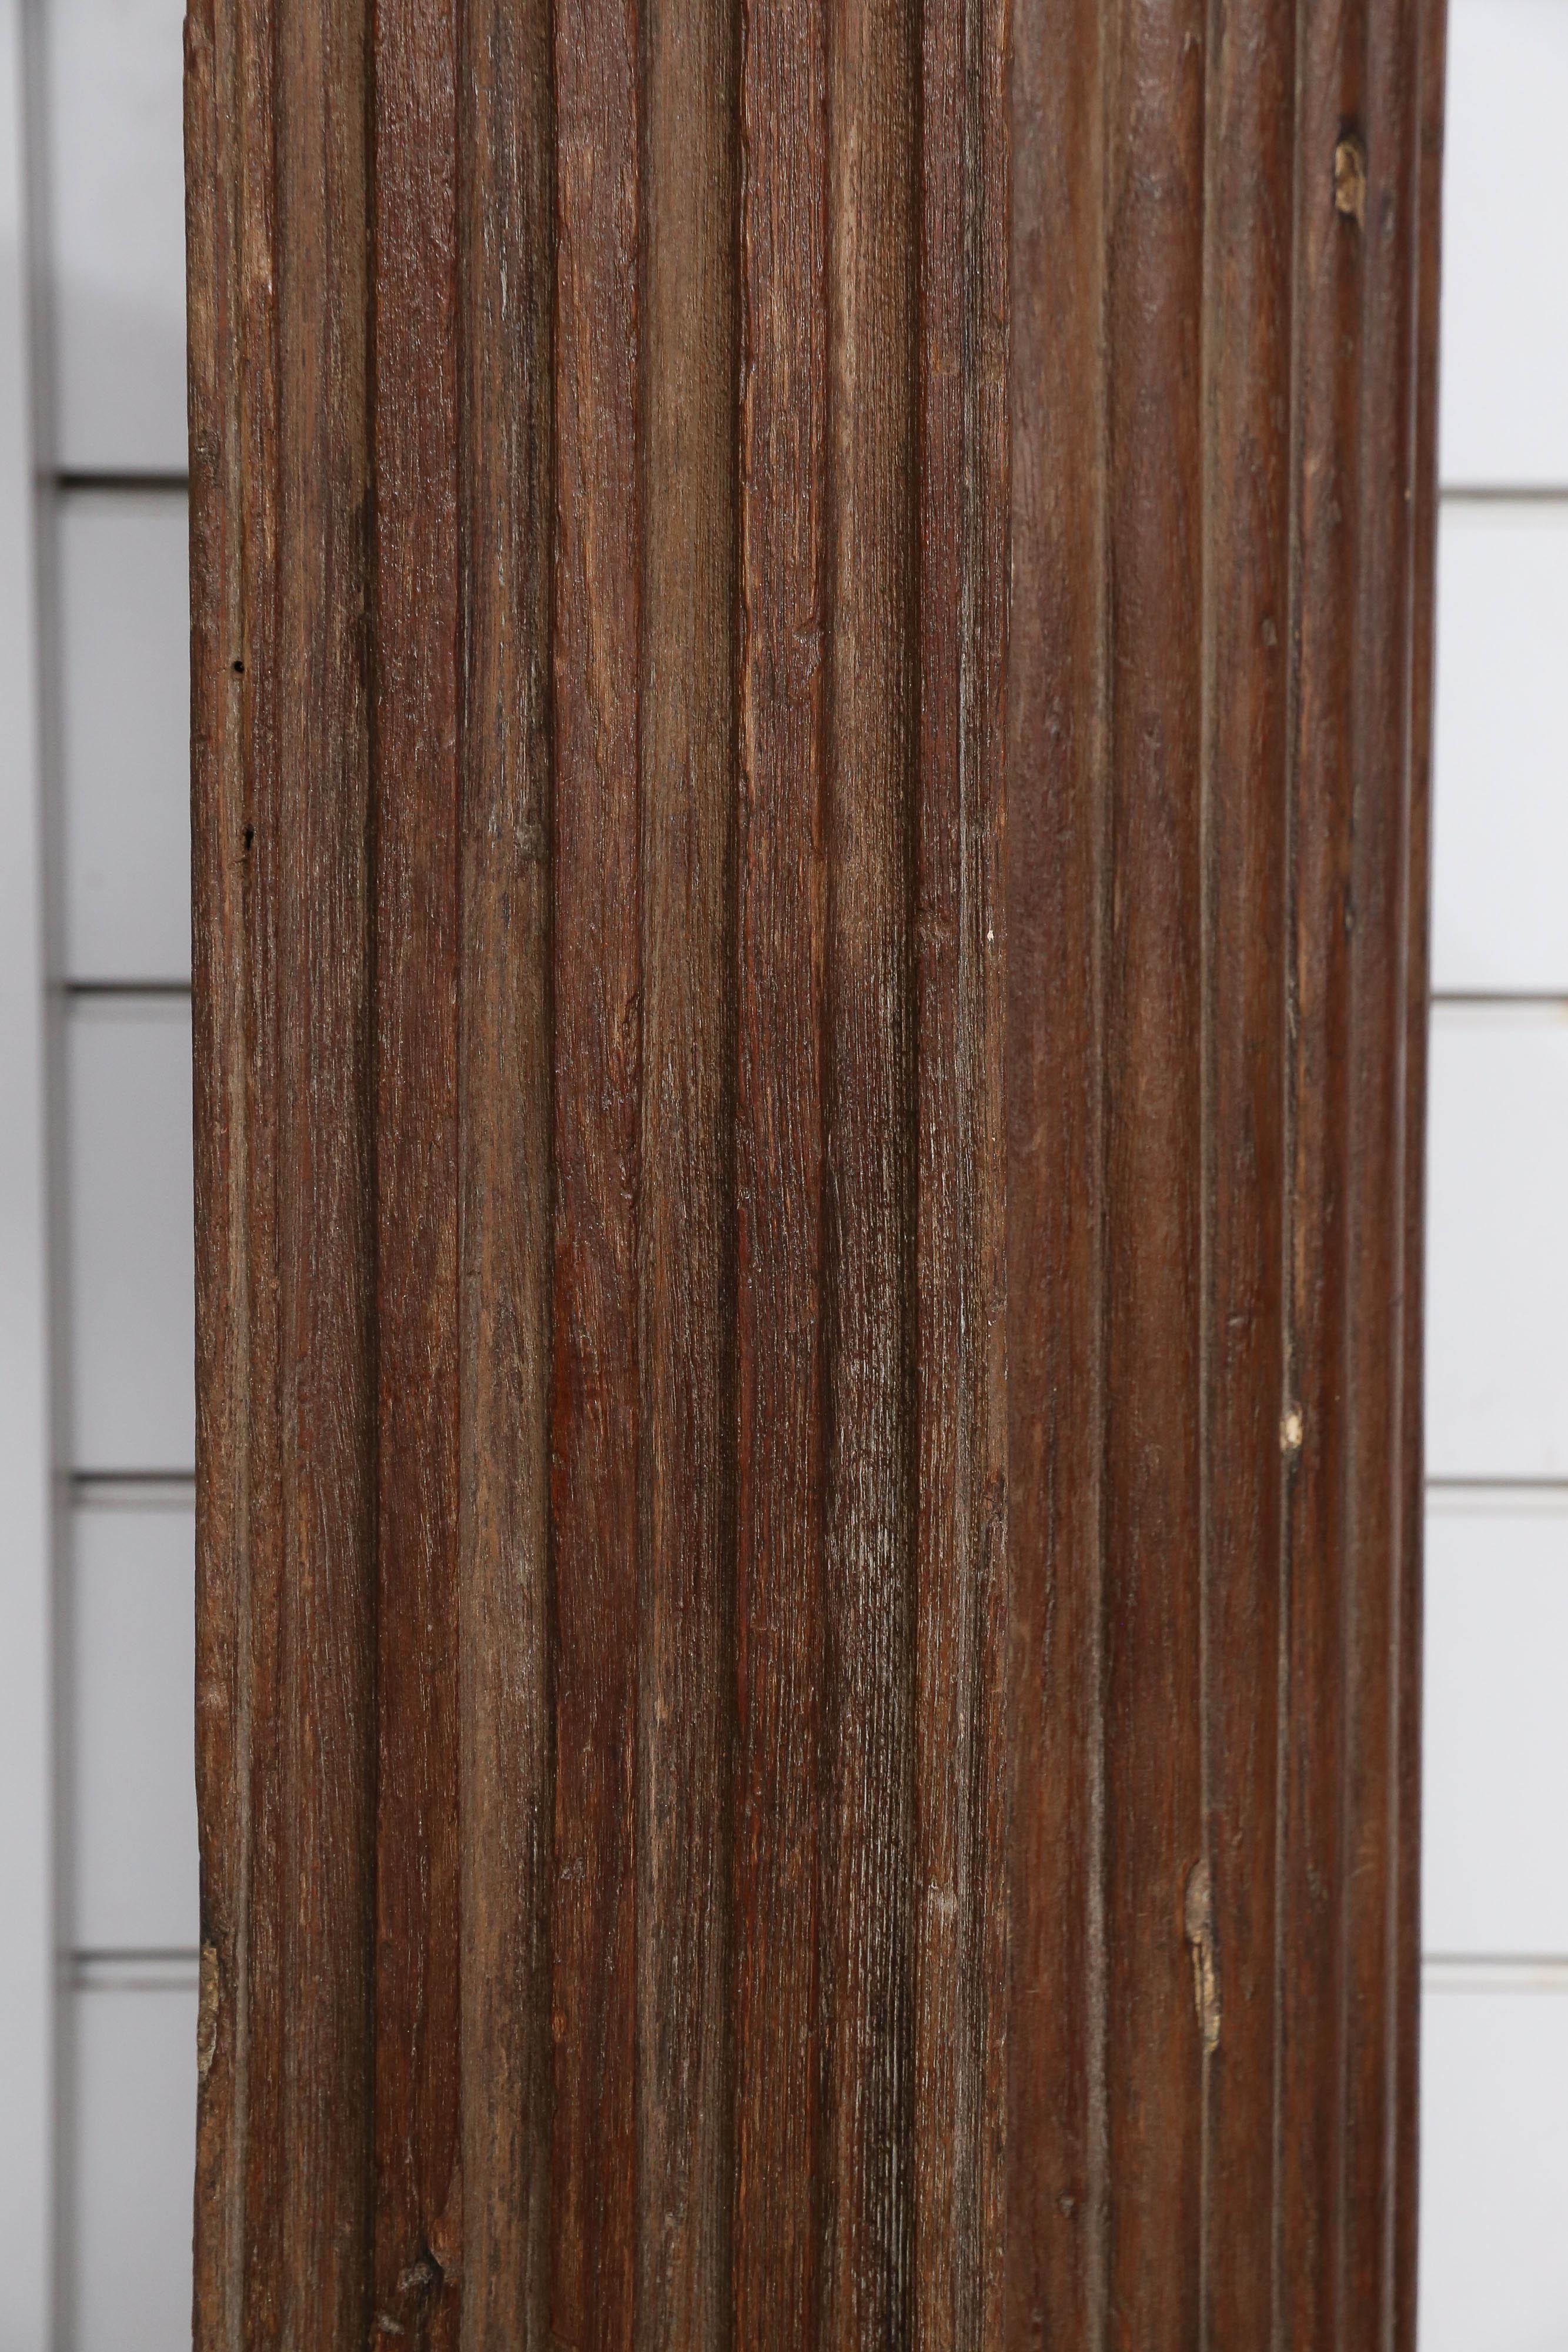 Teak Set of Four 1820s Monumental Load Bearing Columns from an Old Mansion from Goa. For Sale